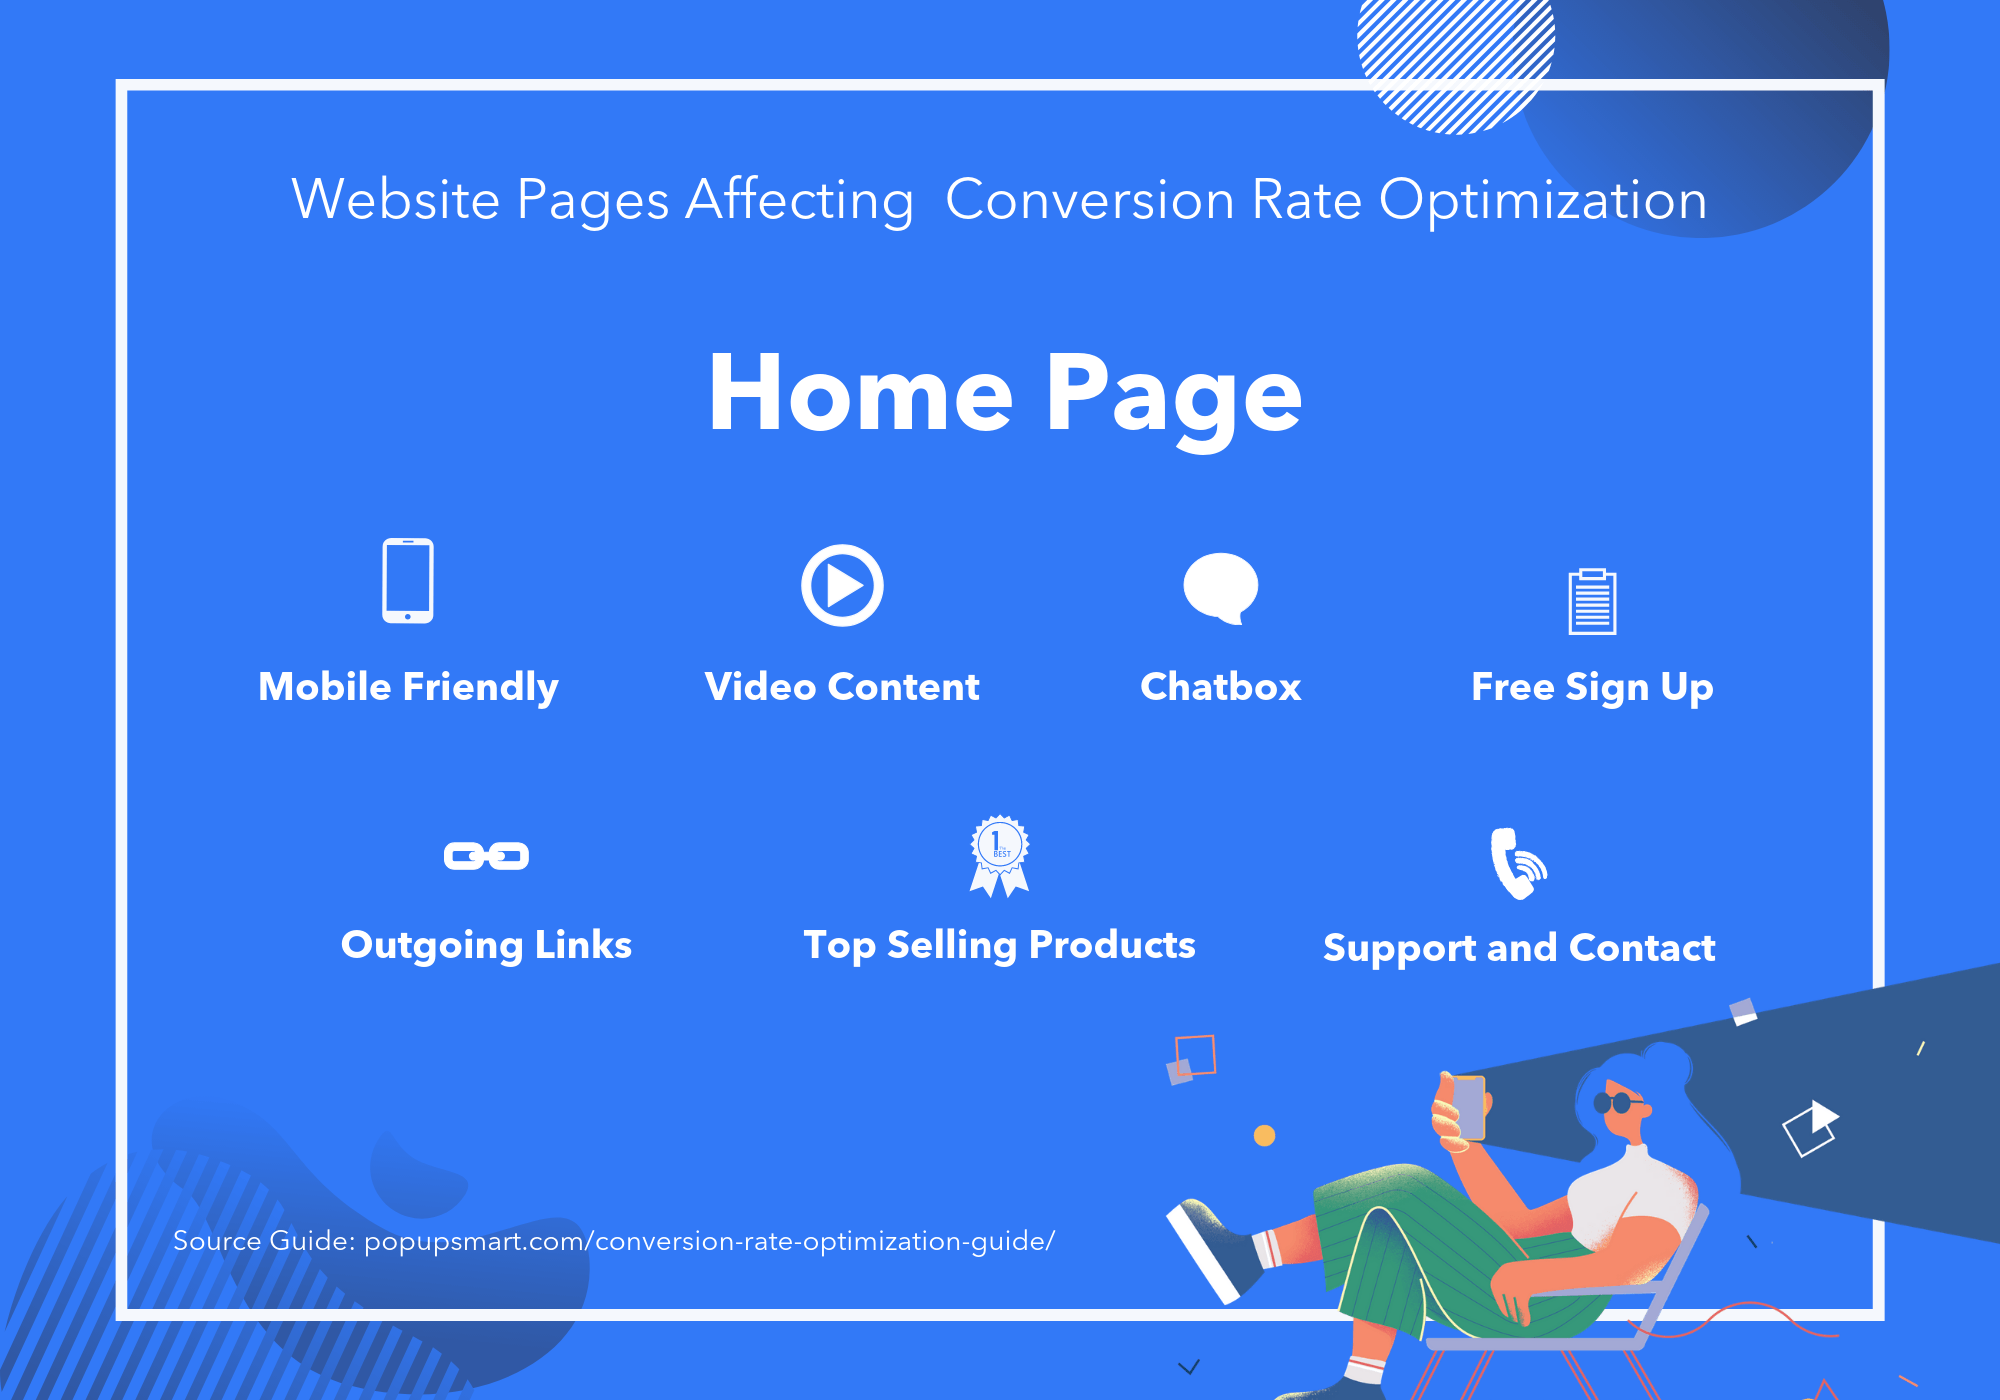 Webpages for Conversion Rate Optimization: Homepage